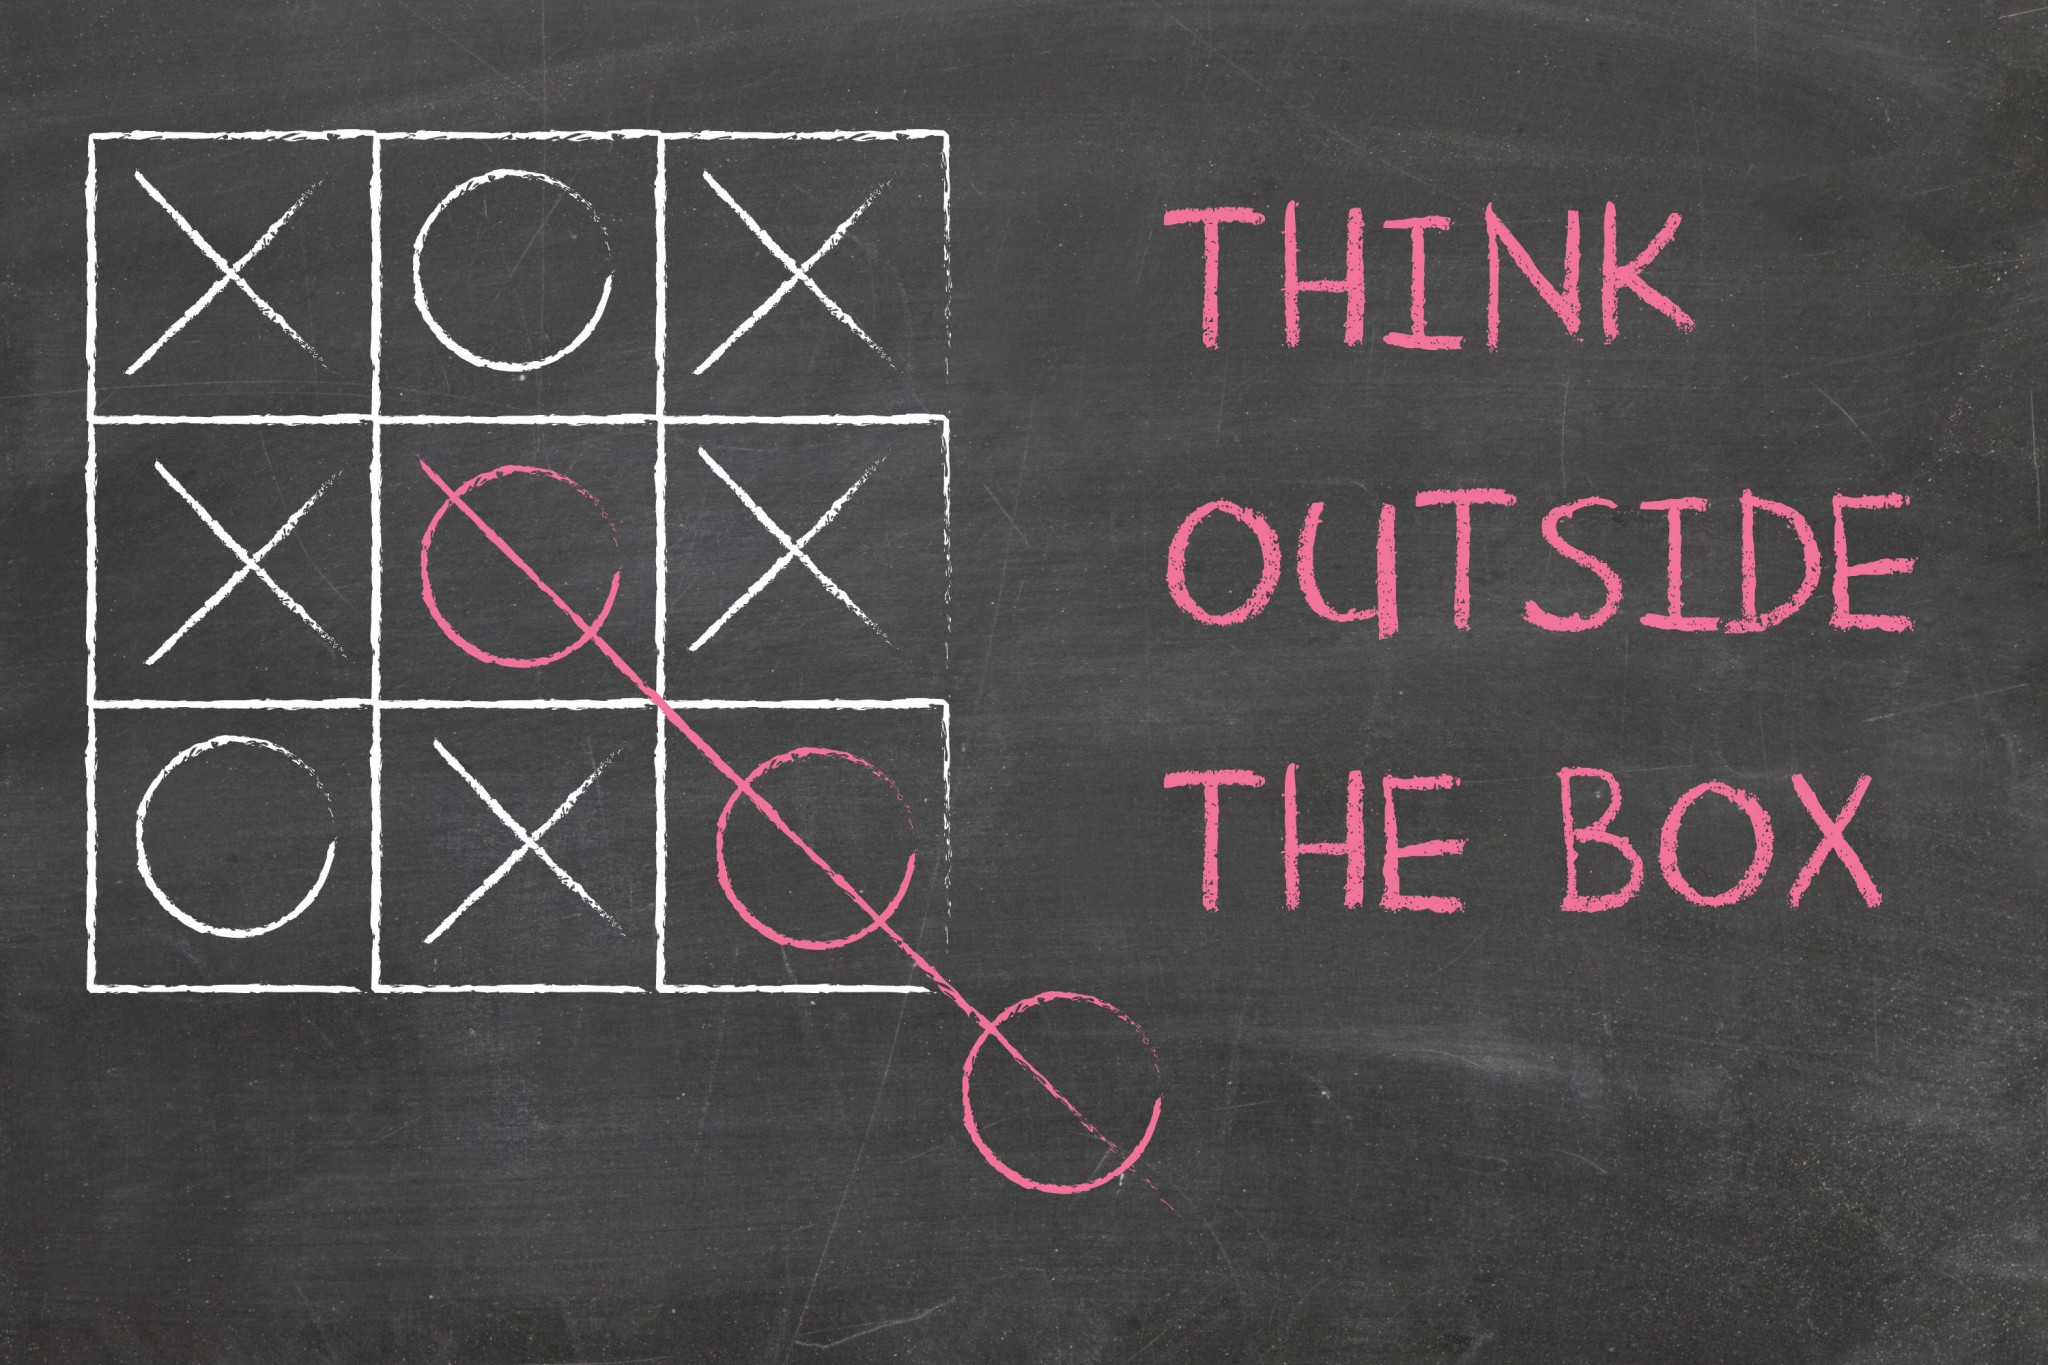 Think things out. Think outside the Box. Out of the Box мышление. Thinking outside the Box. "Think outside the Box" слоган компании.